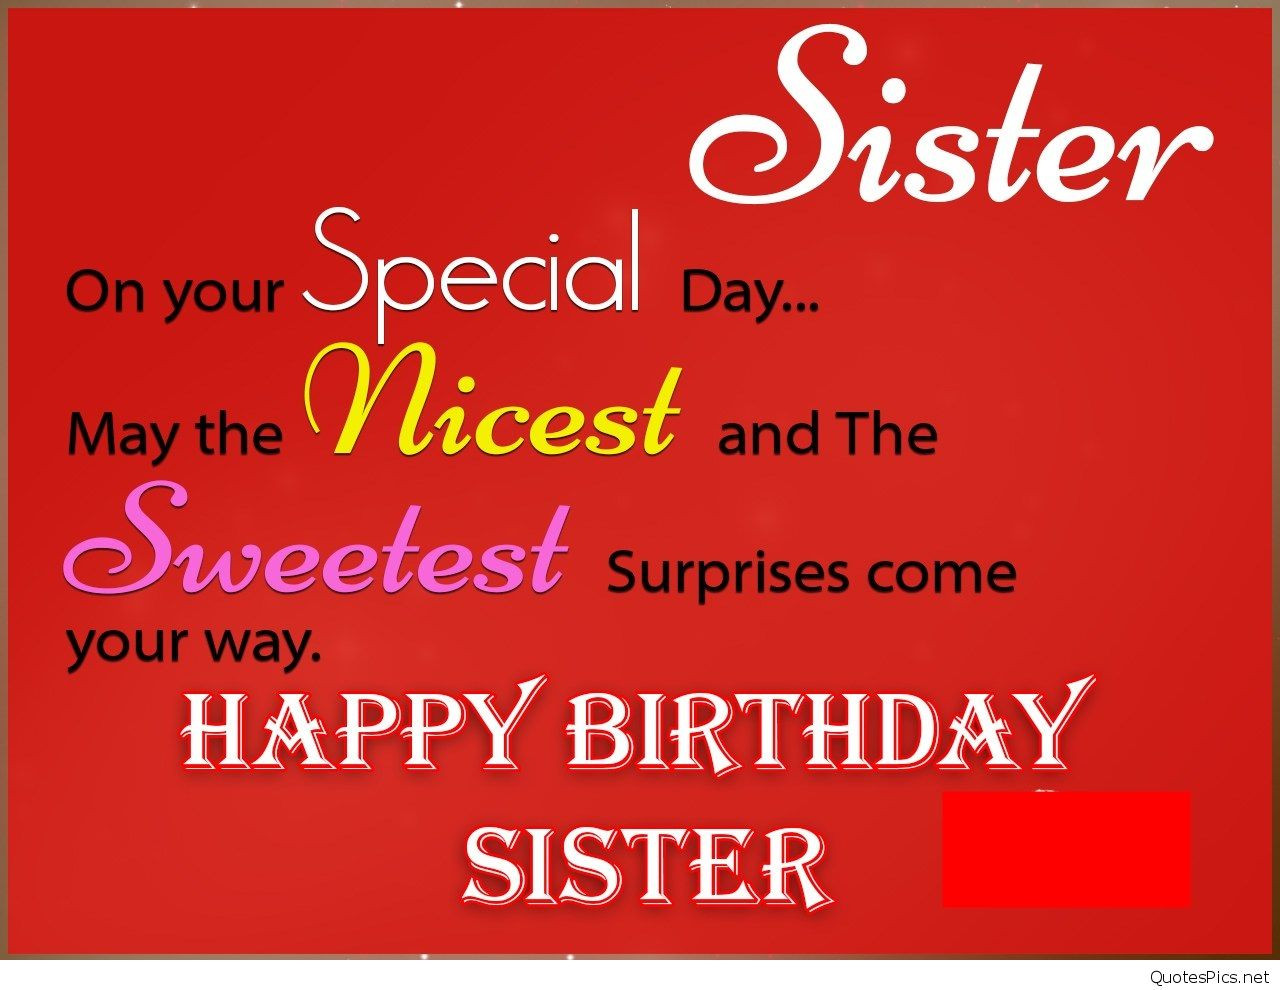 Sample Birthday Wishes
 Best happy birthday wishes cards for sister brother